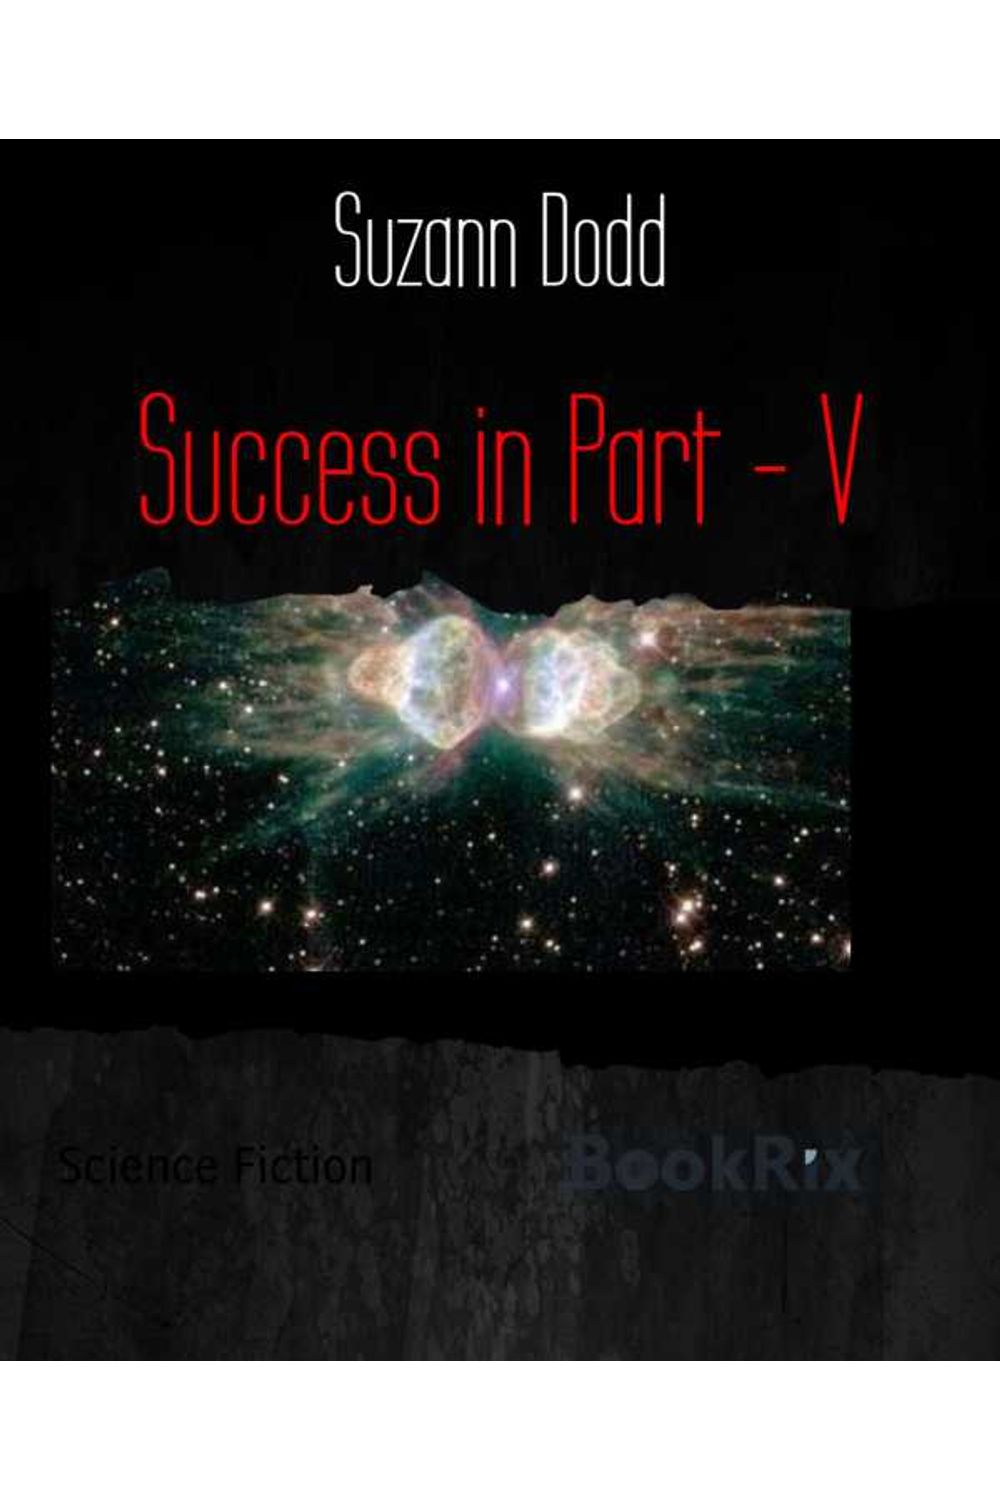 bw-success-in-part-v-bookrix-9783755403203